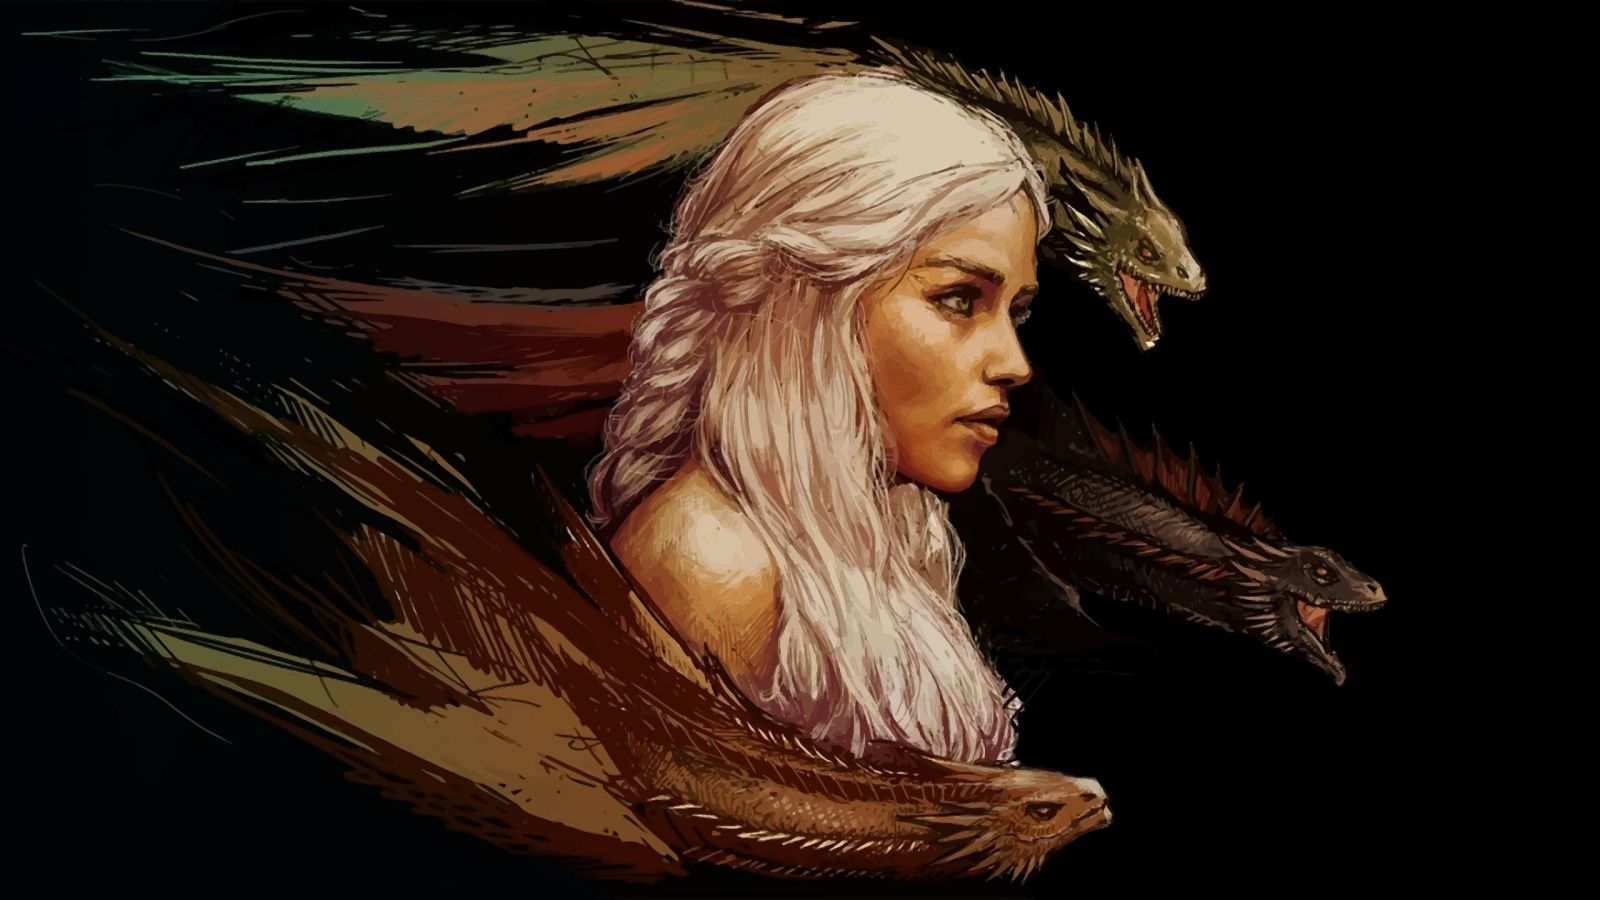 Game Of Thrones wallpaper in 1600x900 resolution